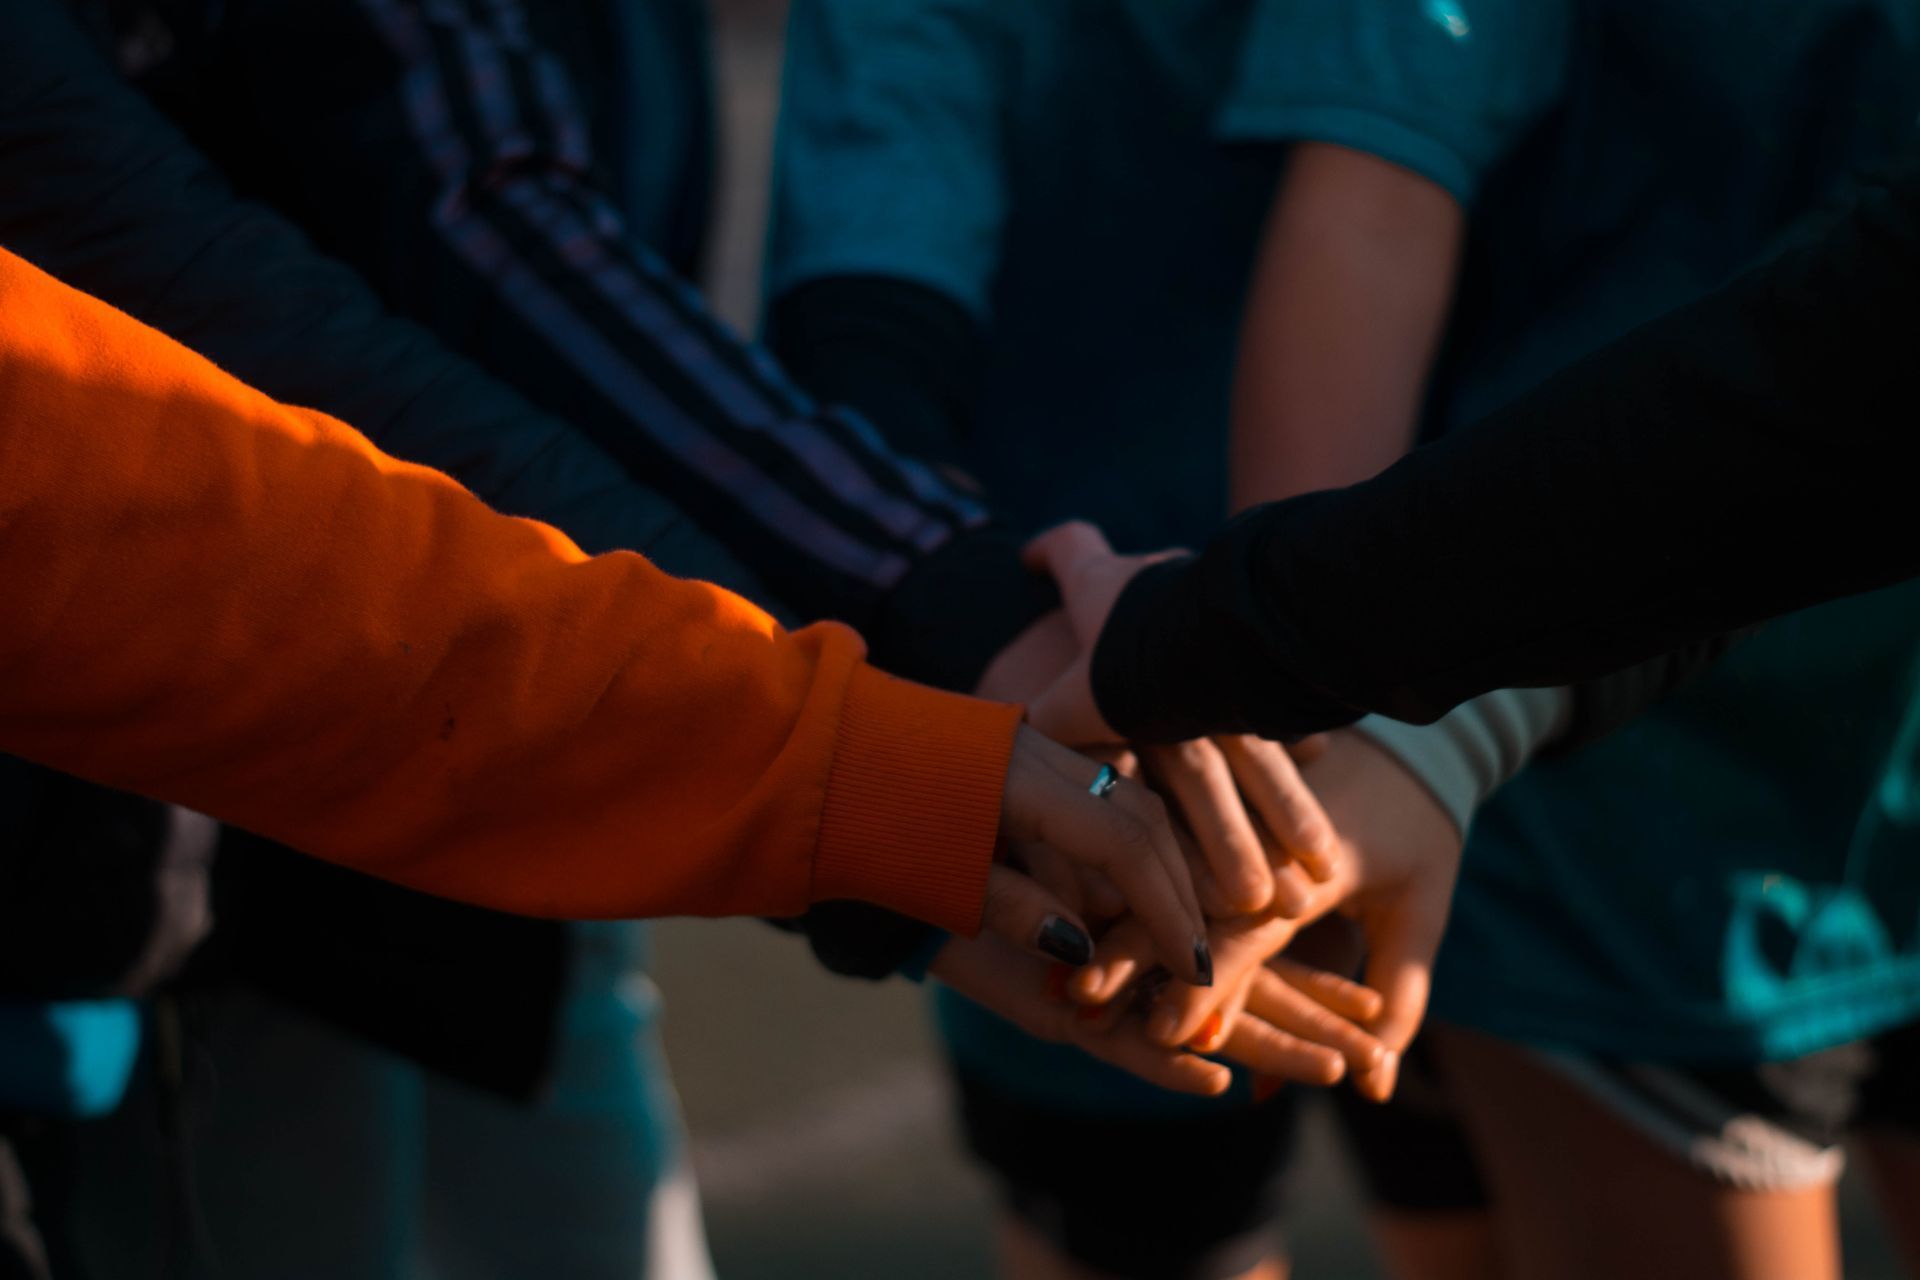 a group of people are putting their hands together in a huddle